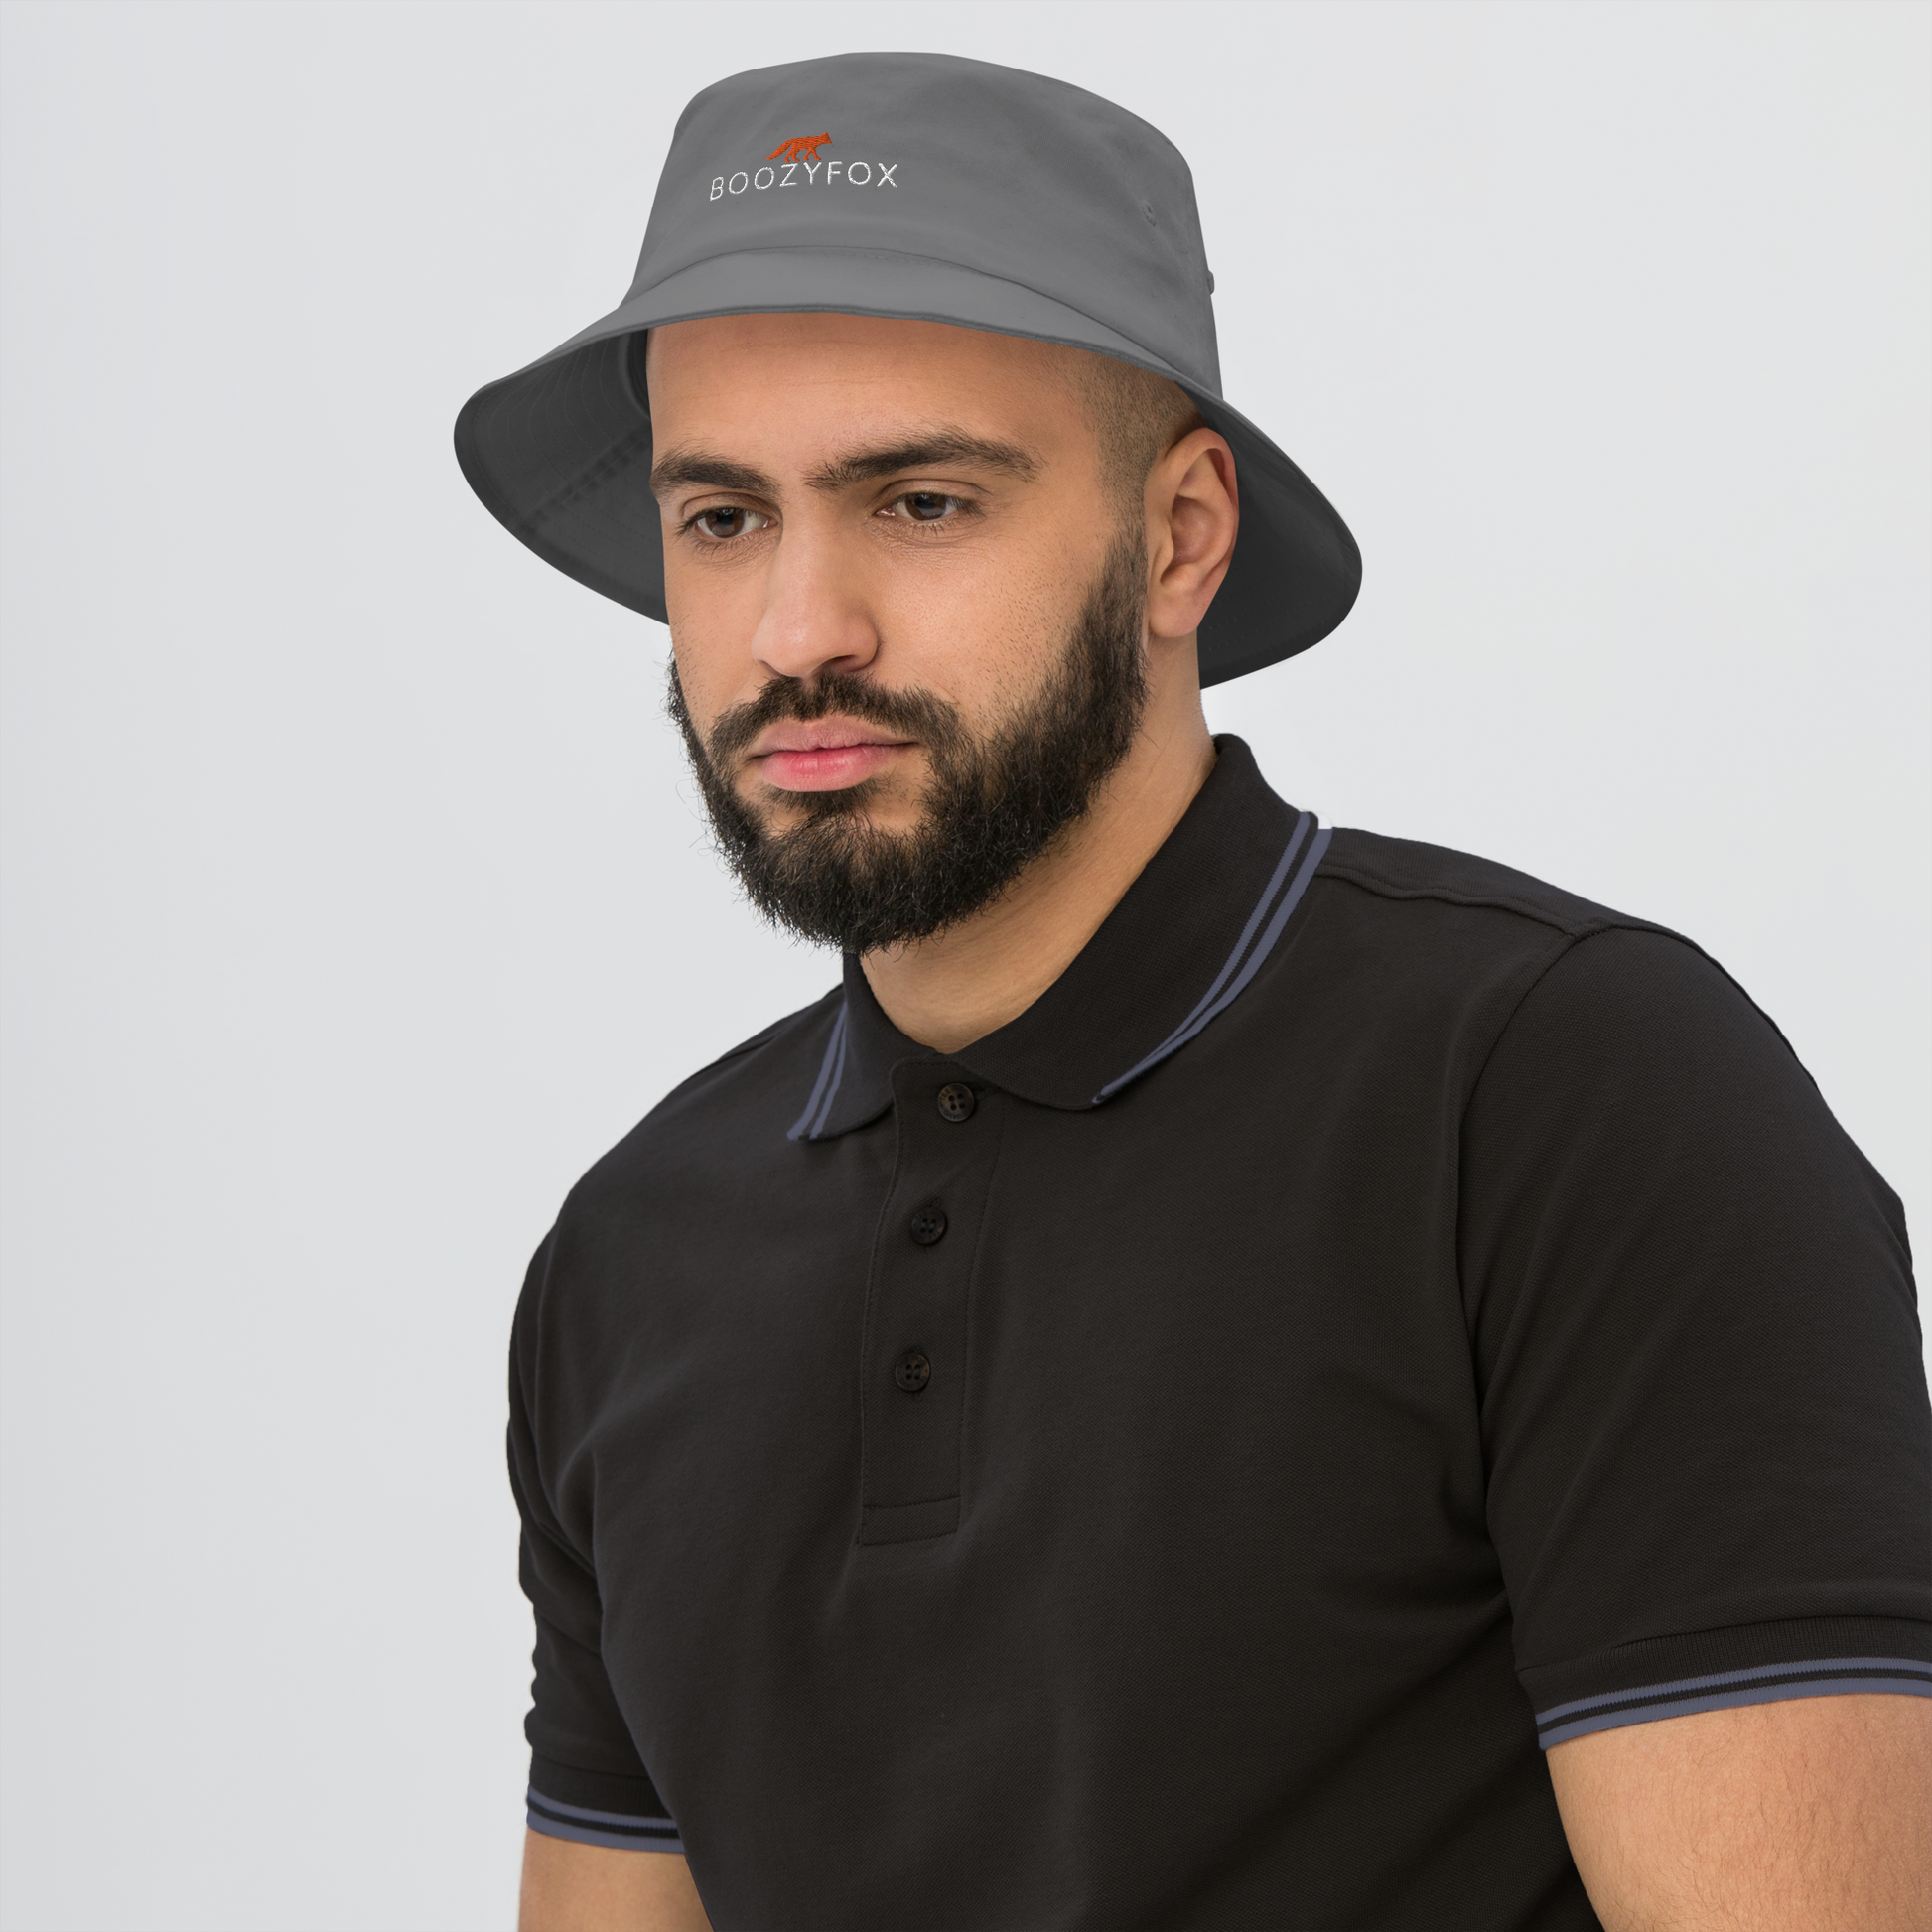 Man wearing a Cool Grey Bucket Hat featuring a striking embroidered Boozy Fox logo on front. Shop Cool Sun Protection Bucket Hats And Wide Brim Hats Online - Boozy Fox